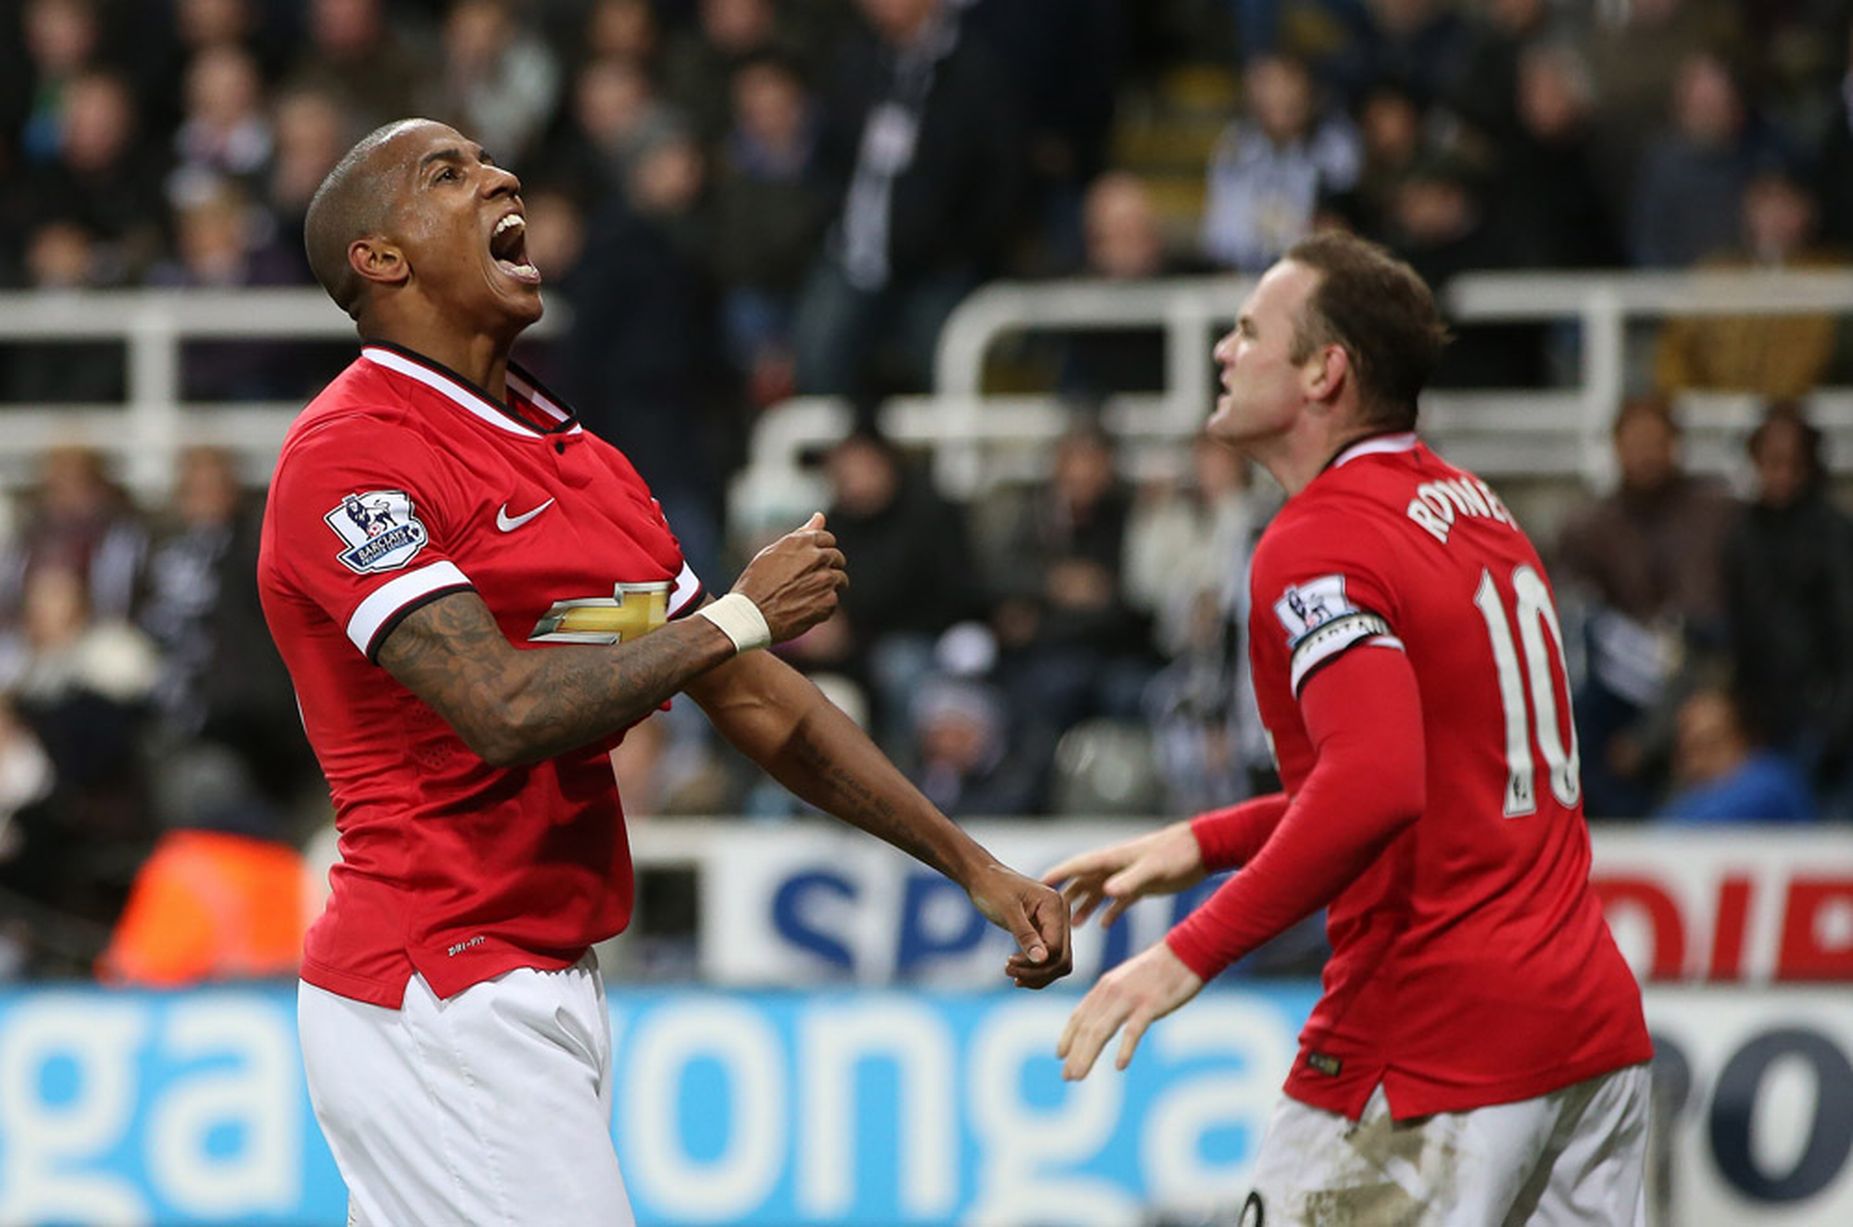 Newcastle-v-Manchester-United-Mar4-2015-Young-Getty